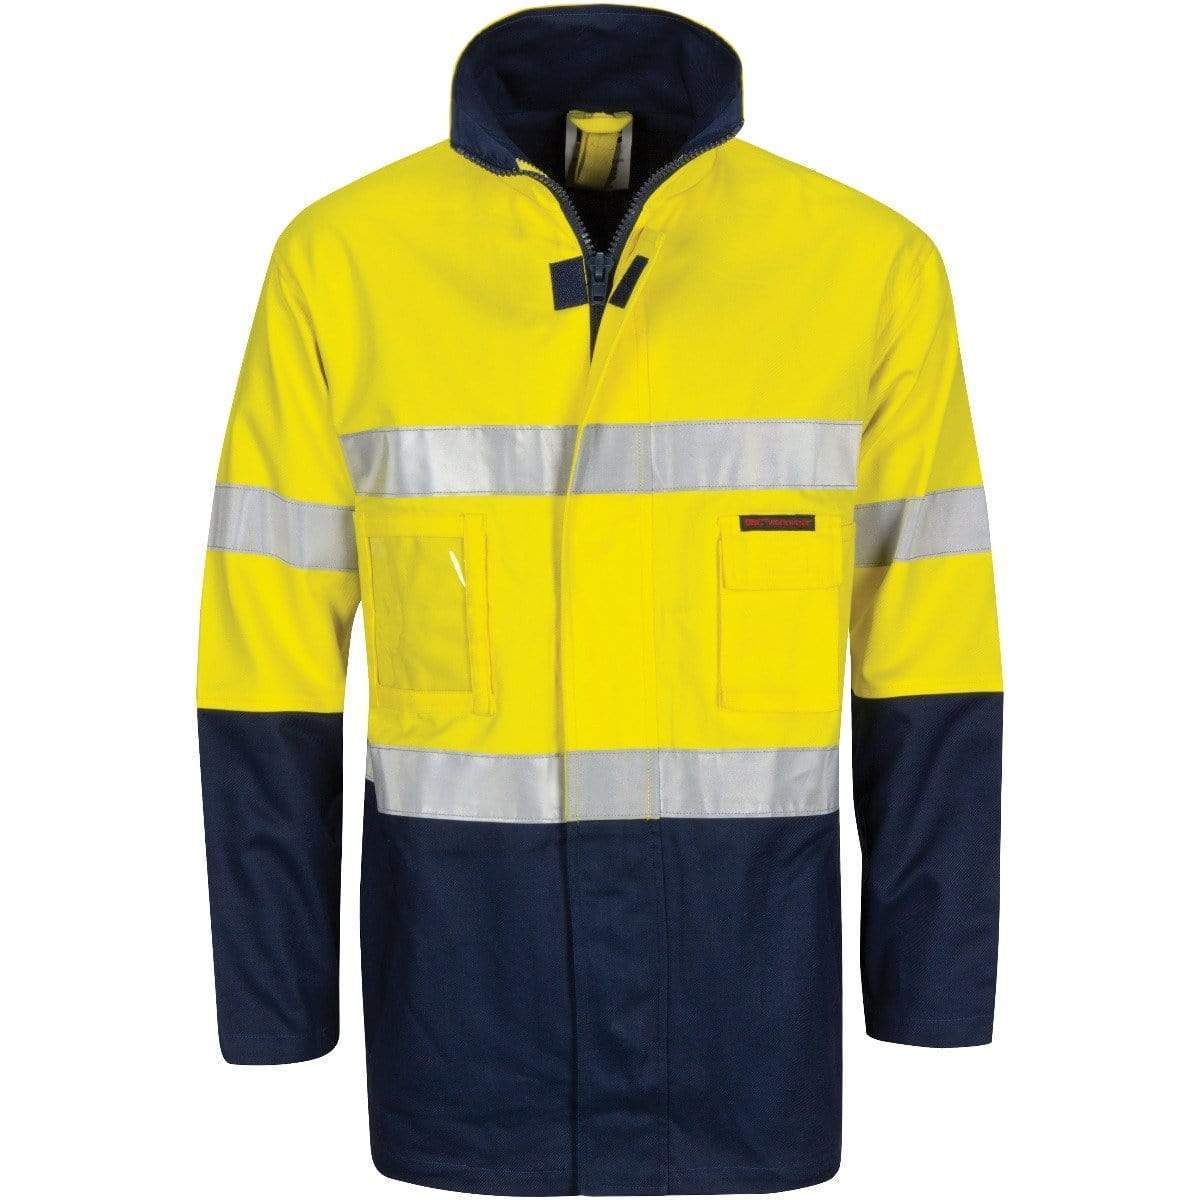 Dnc Workwear Hi-vis Cotton Drill 2-in-1 Jacket With Generic Reflective Tape - 3767 Work Wear DNC Workwear Yellow/Navy XS 